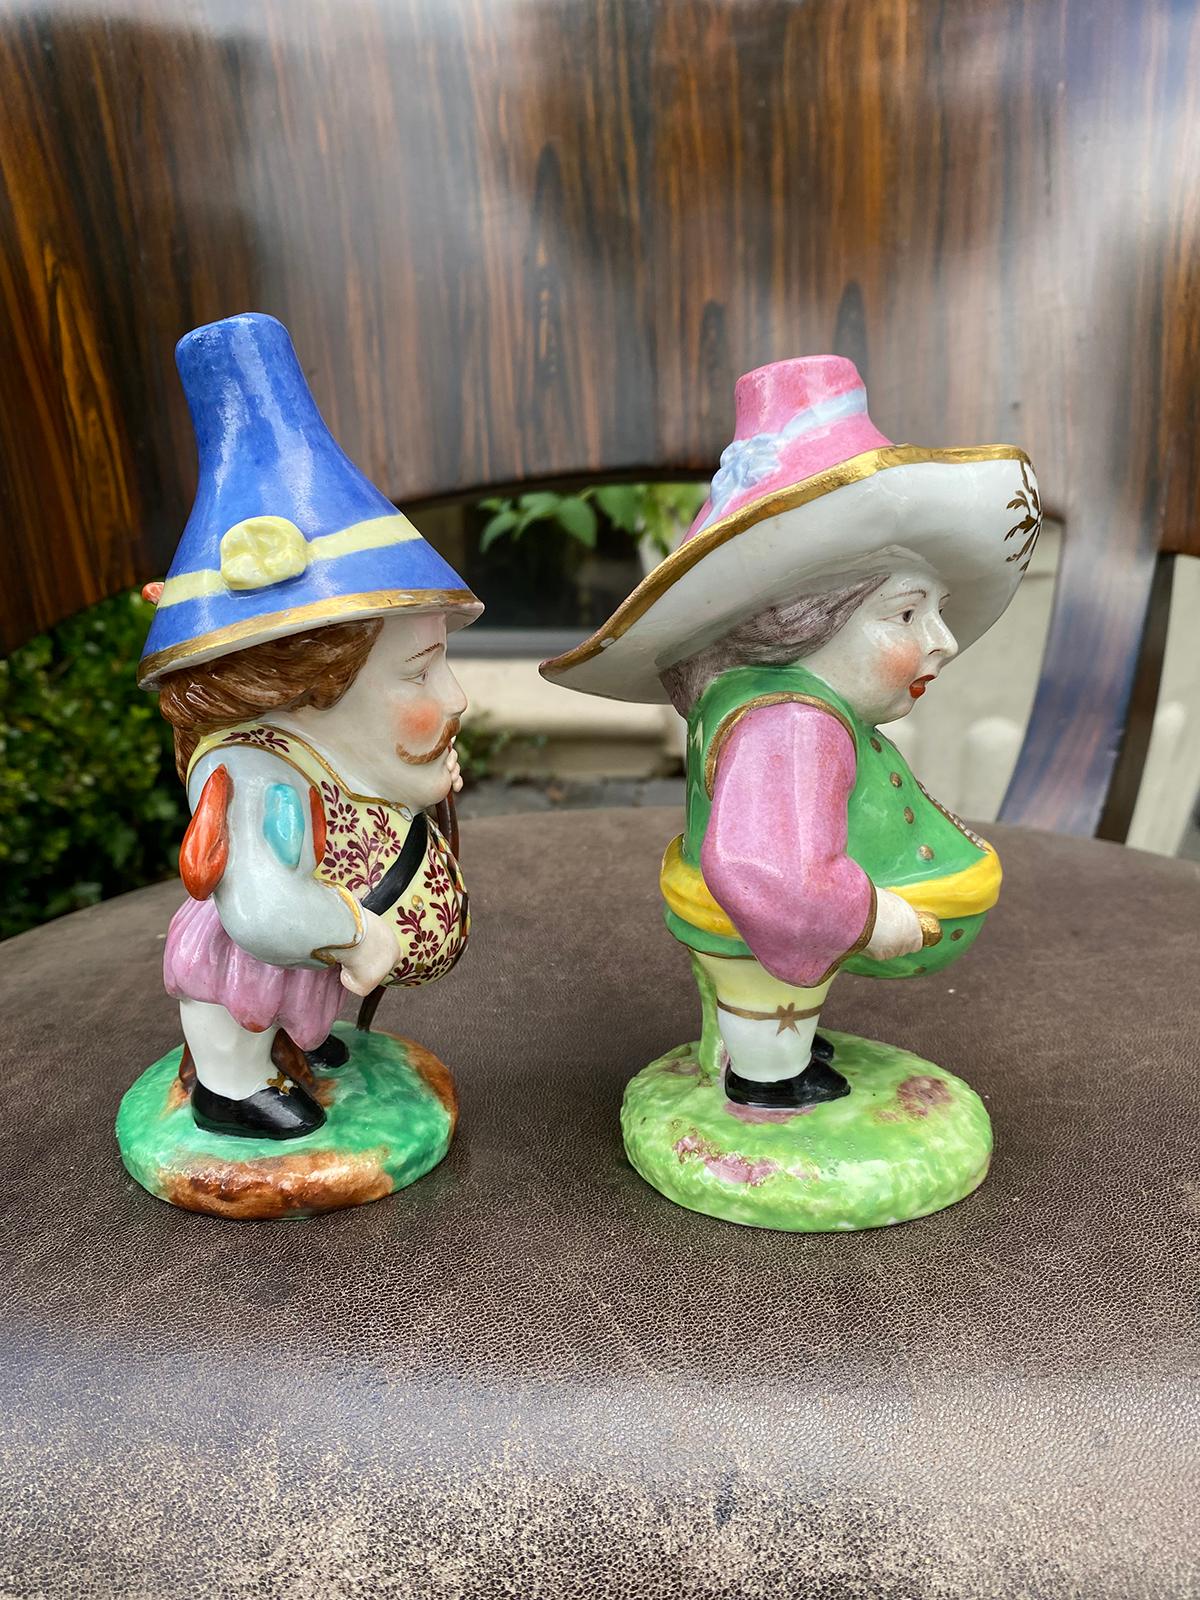 Pair of 18th Century English Attributed to Derby Porcelain Dwarfs For Sale 4